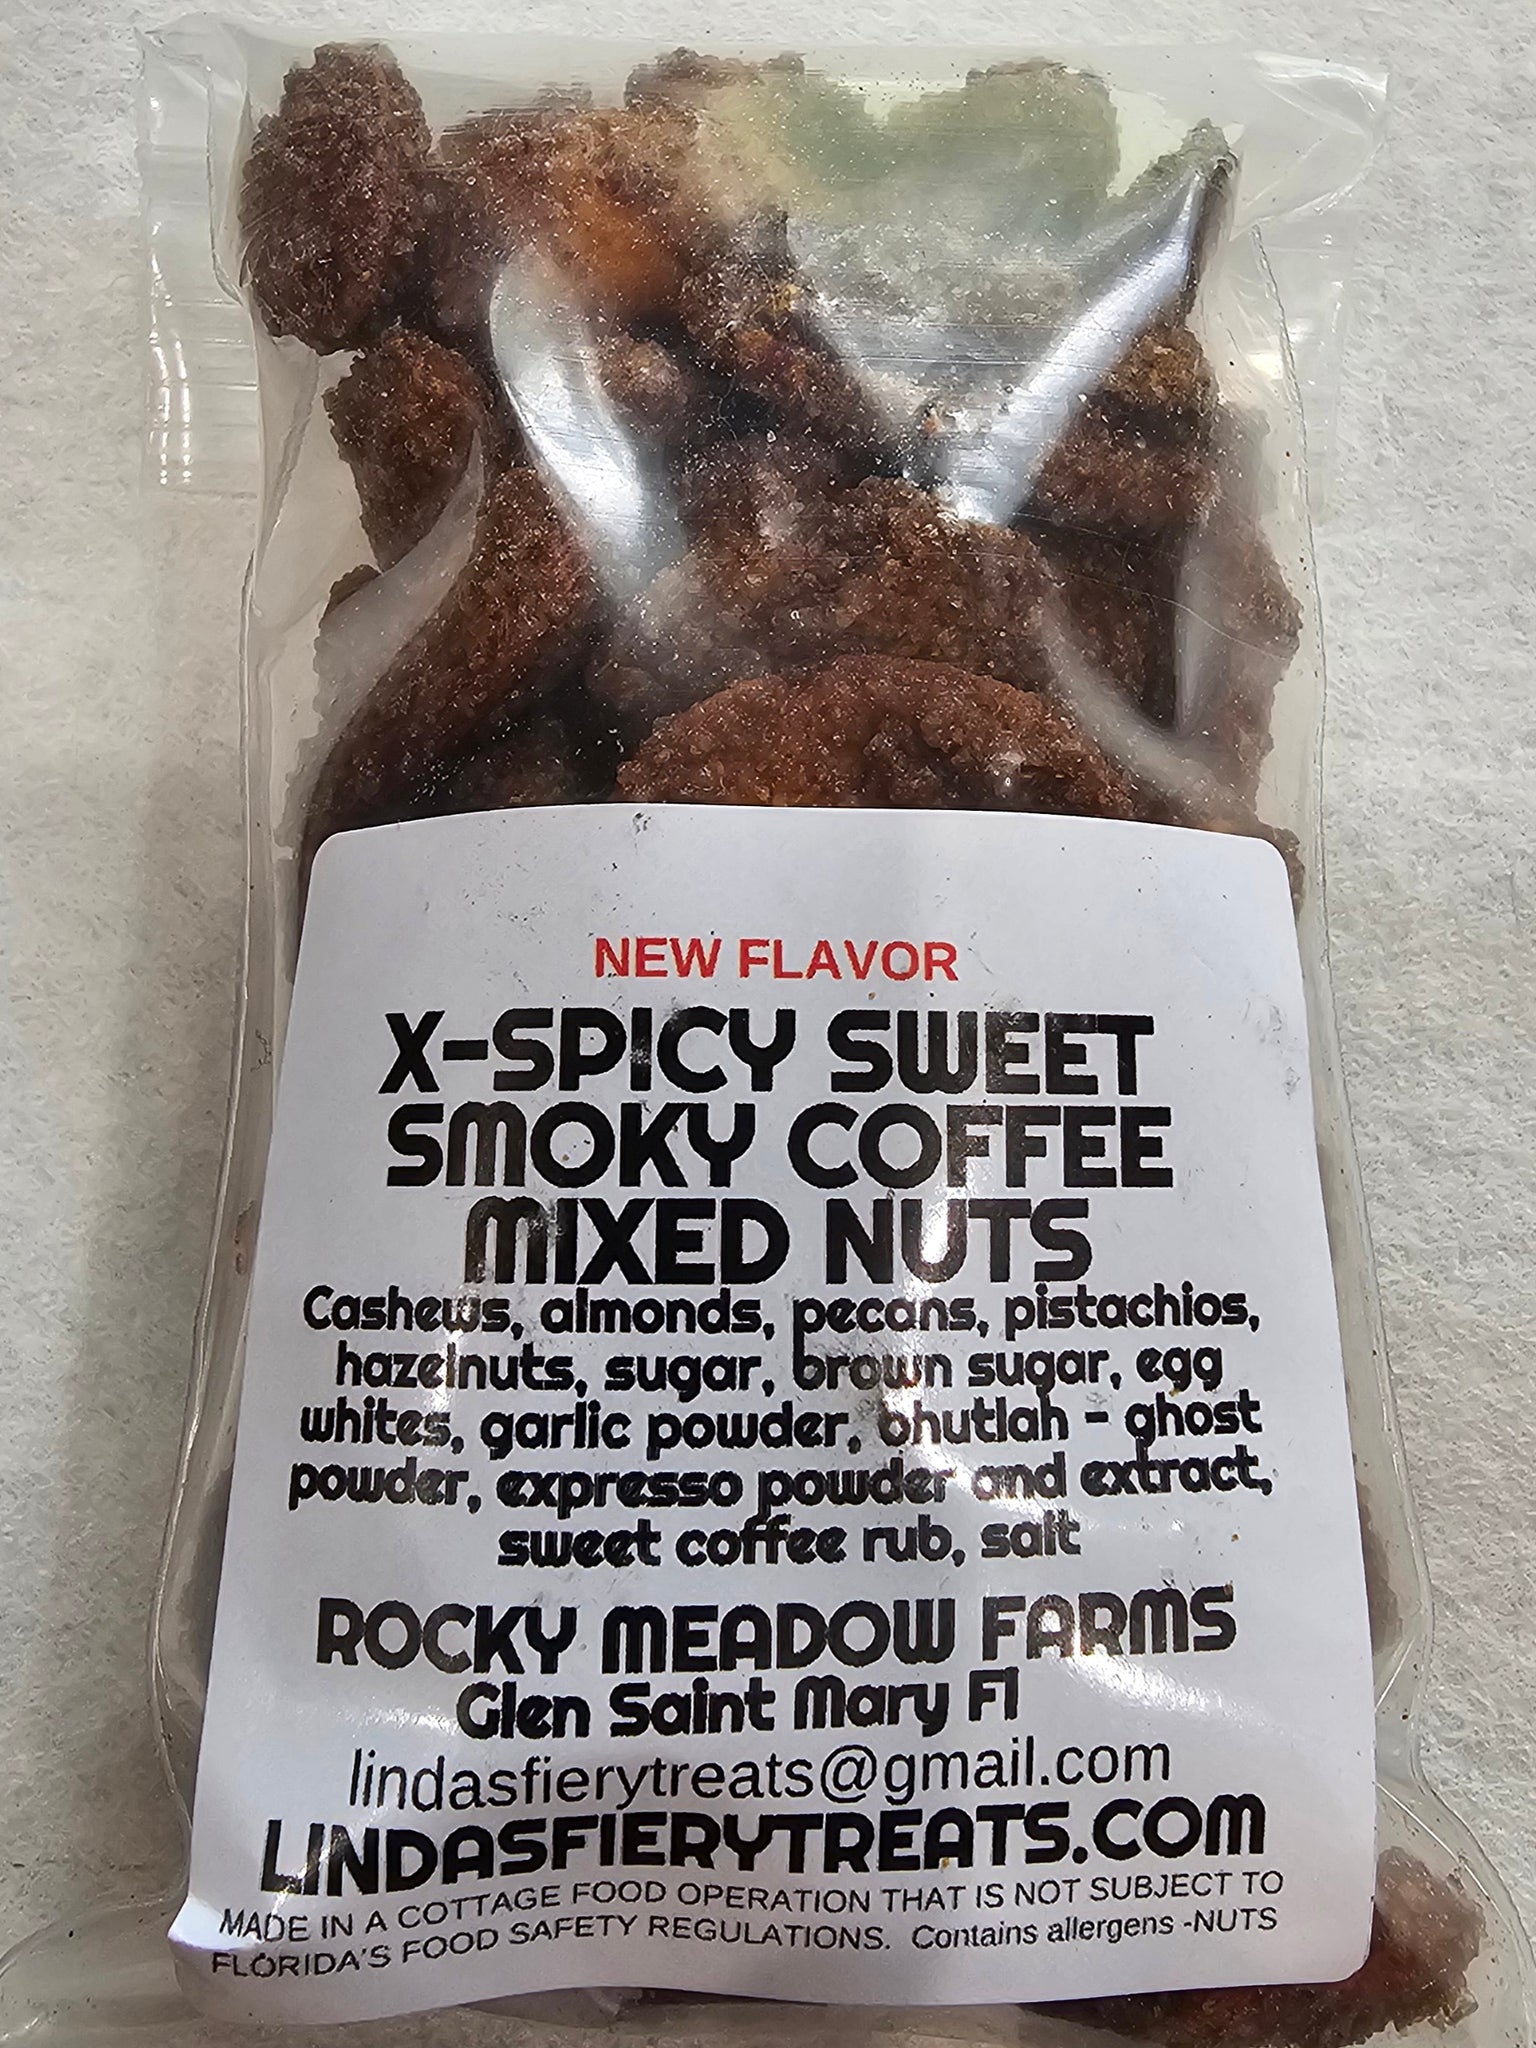 Sweet, spicy, Smokey and coffee mixed nuts.